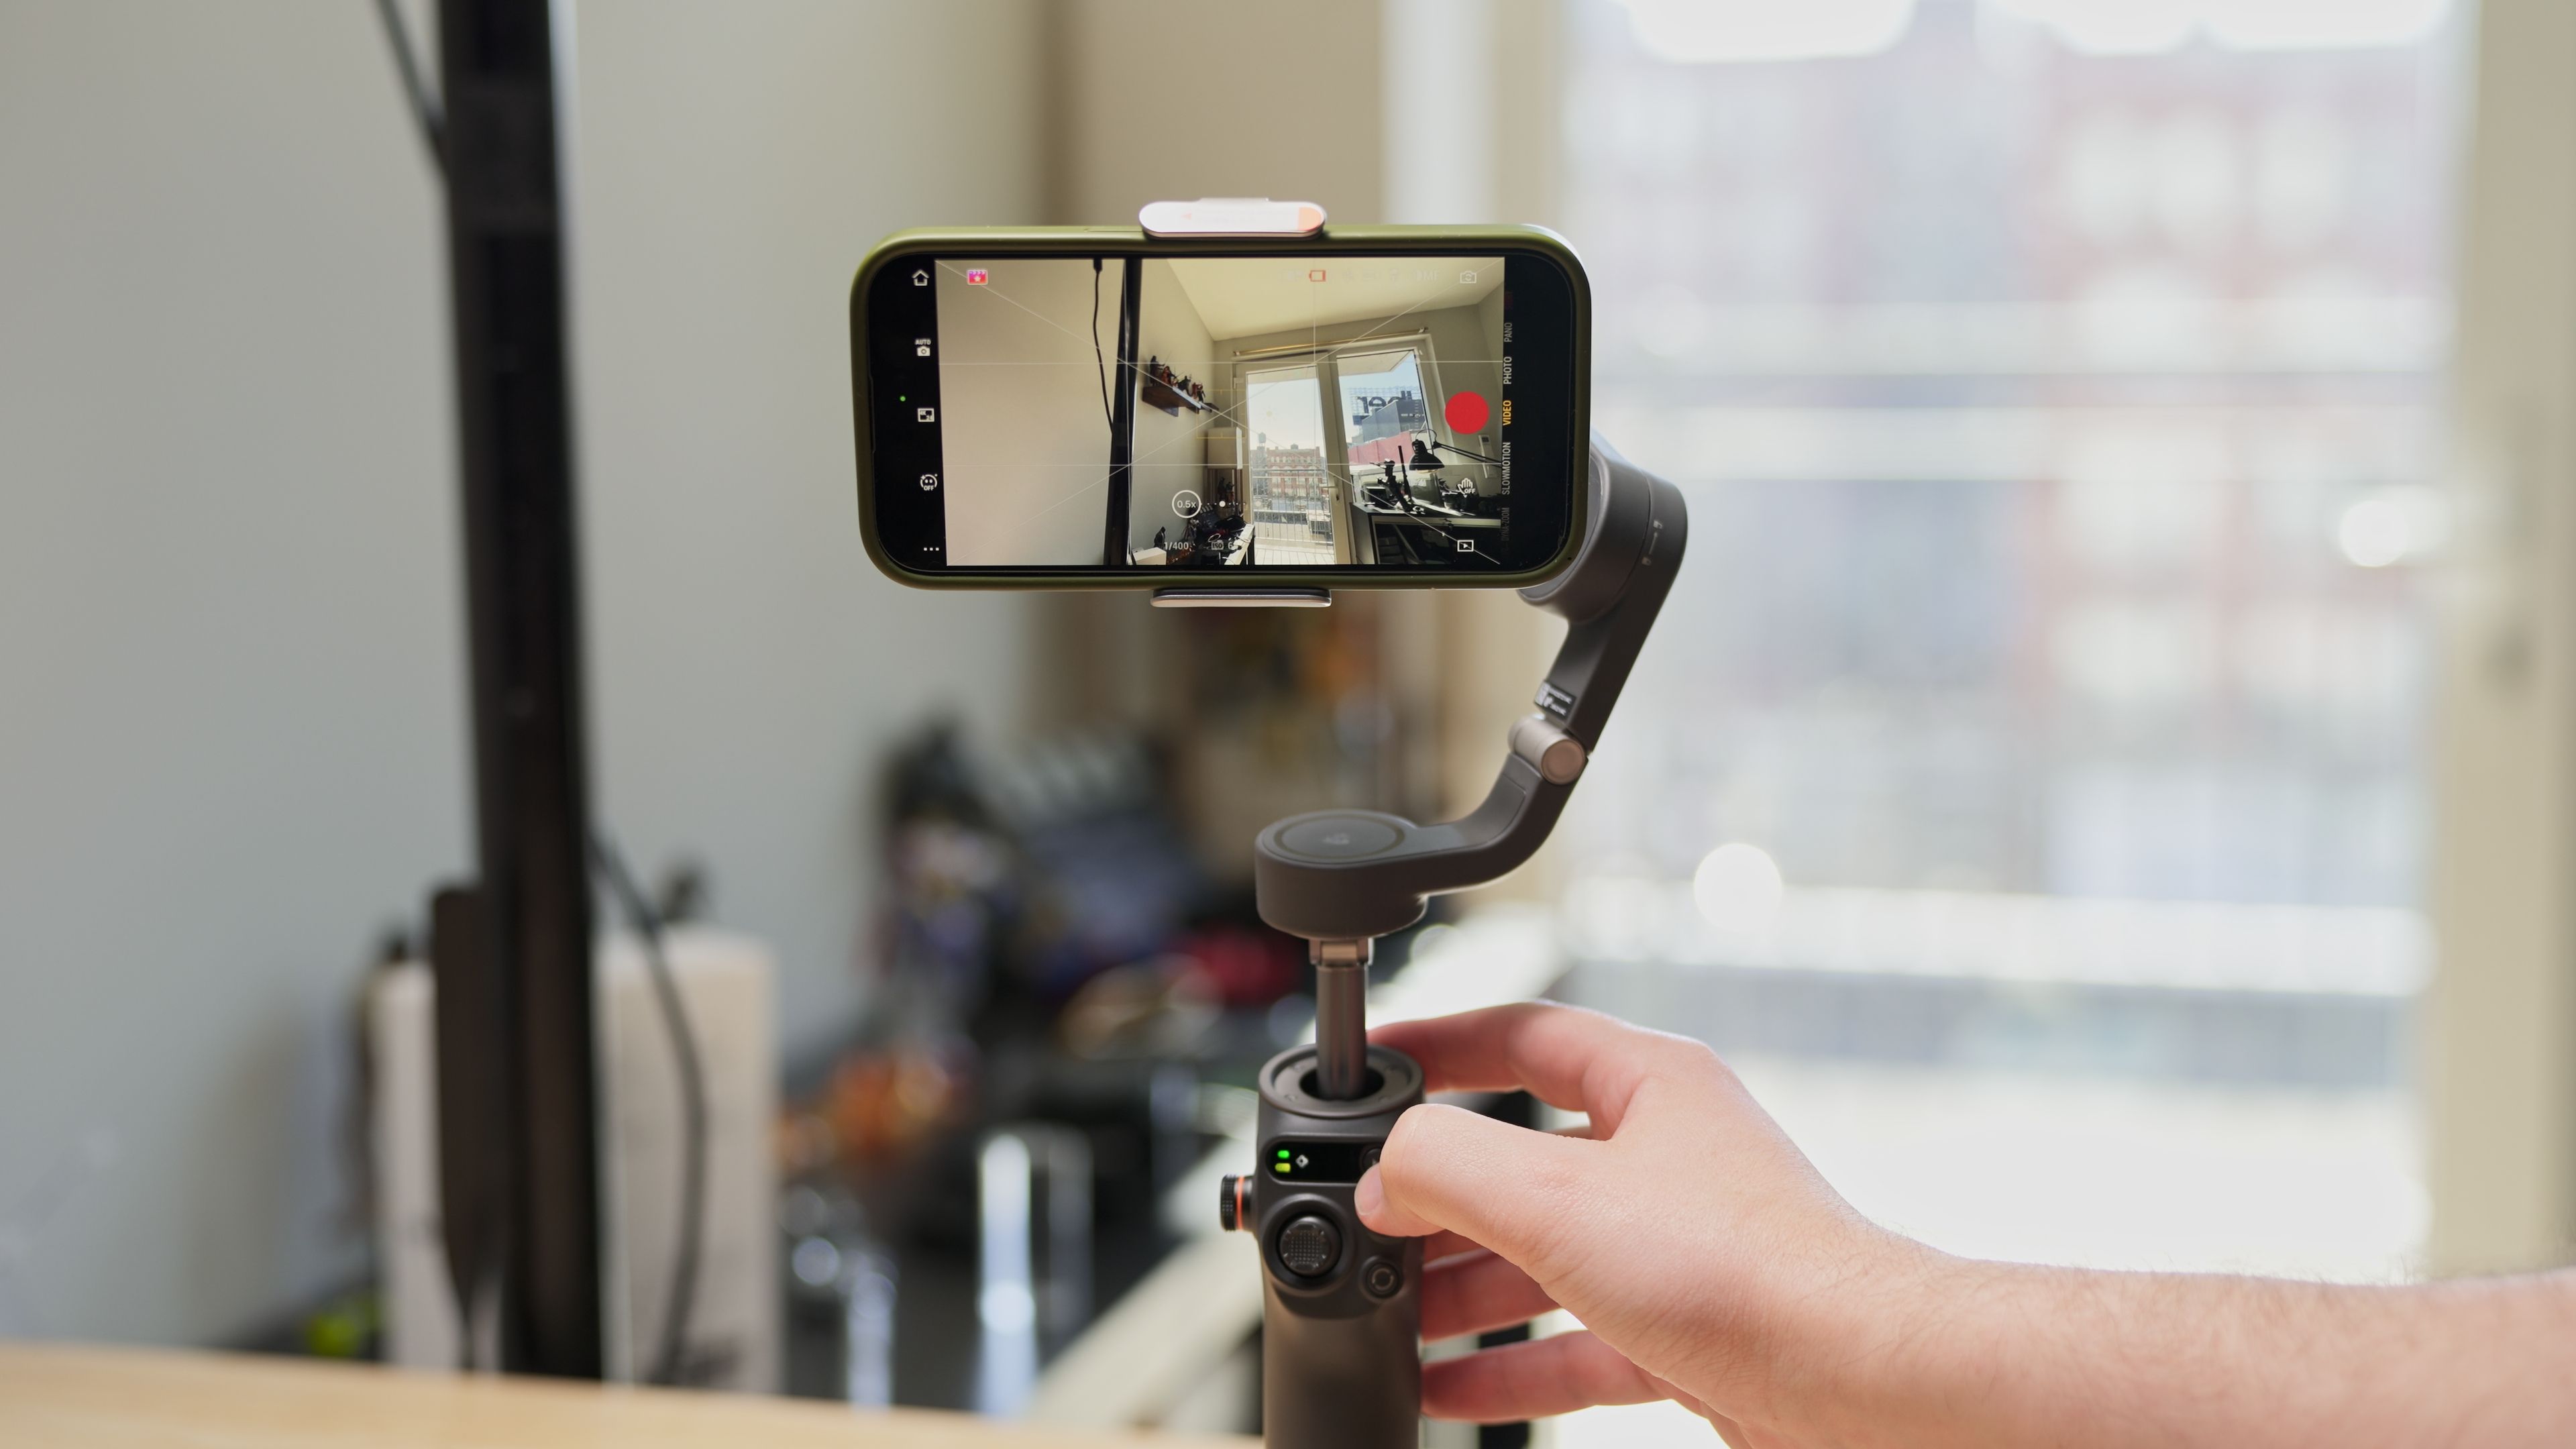 DJI Osmo Mobile 6 Review: Quick Launch and Better Controls